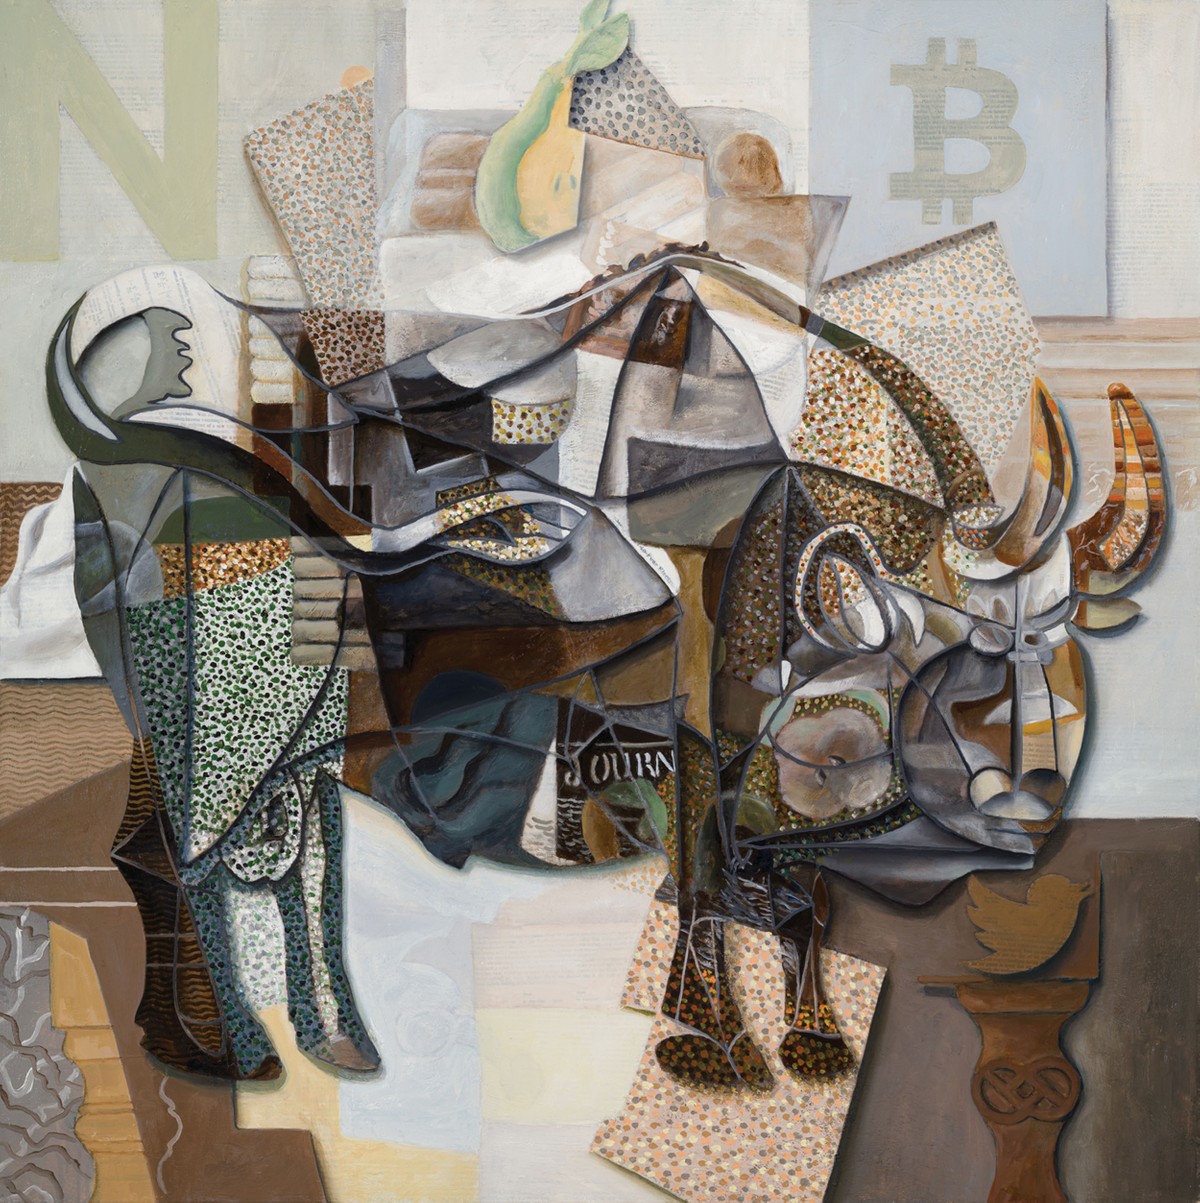 Trevor Jones’ Picasso’s Bull, is an example of the fusion of art and technology